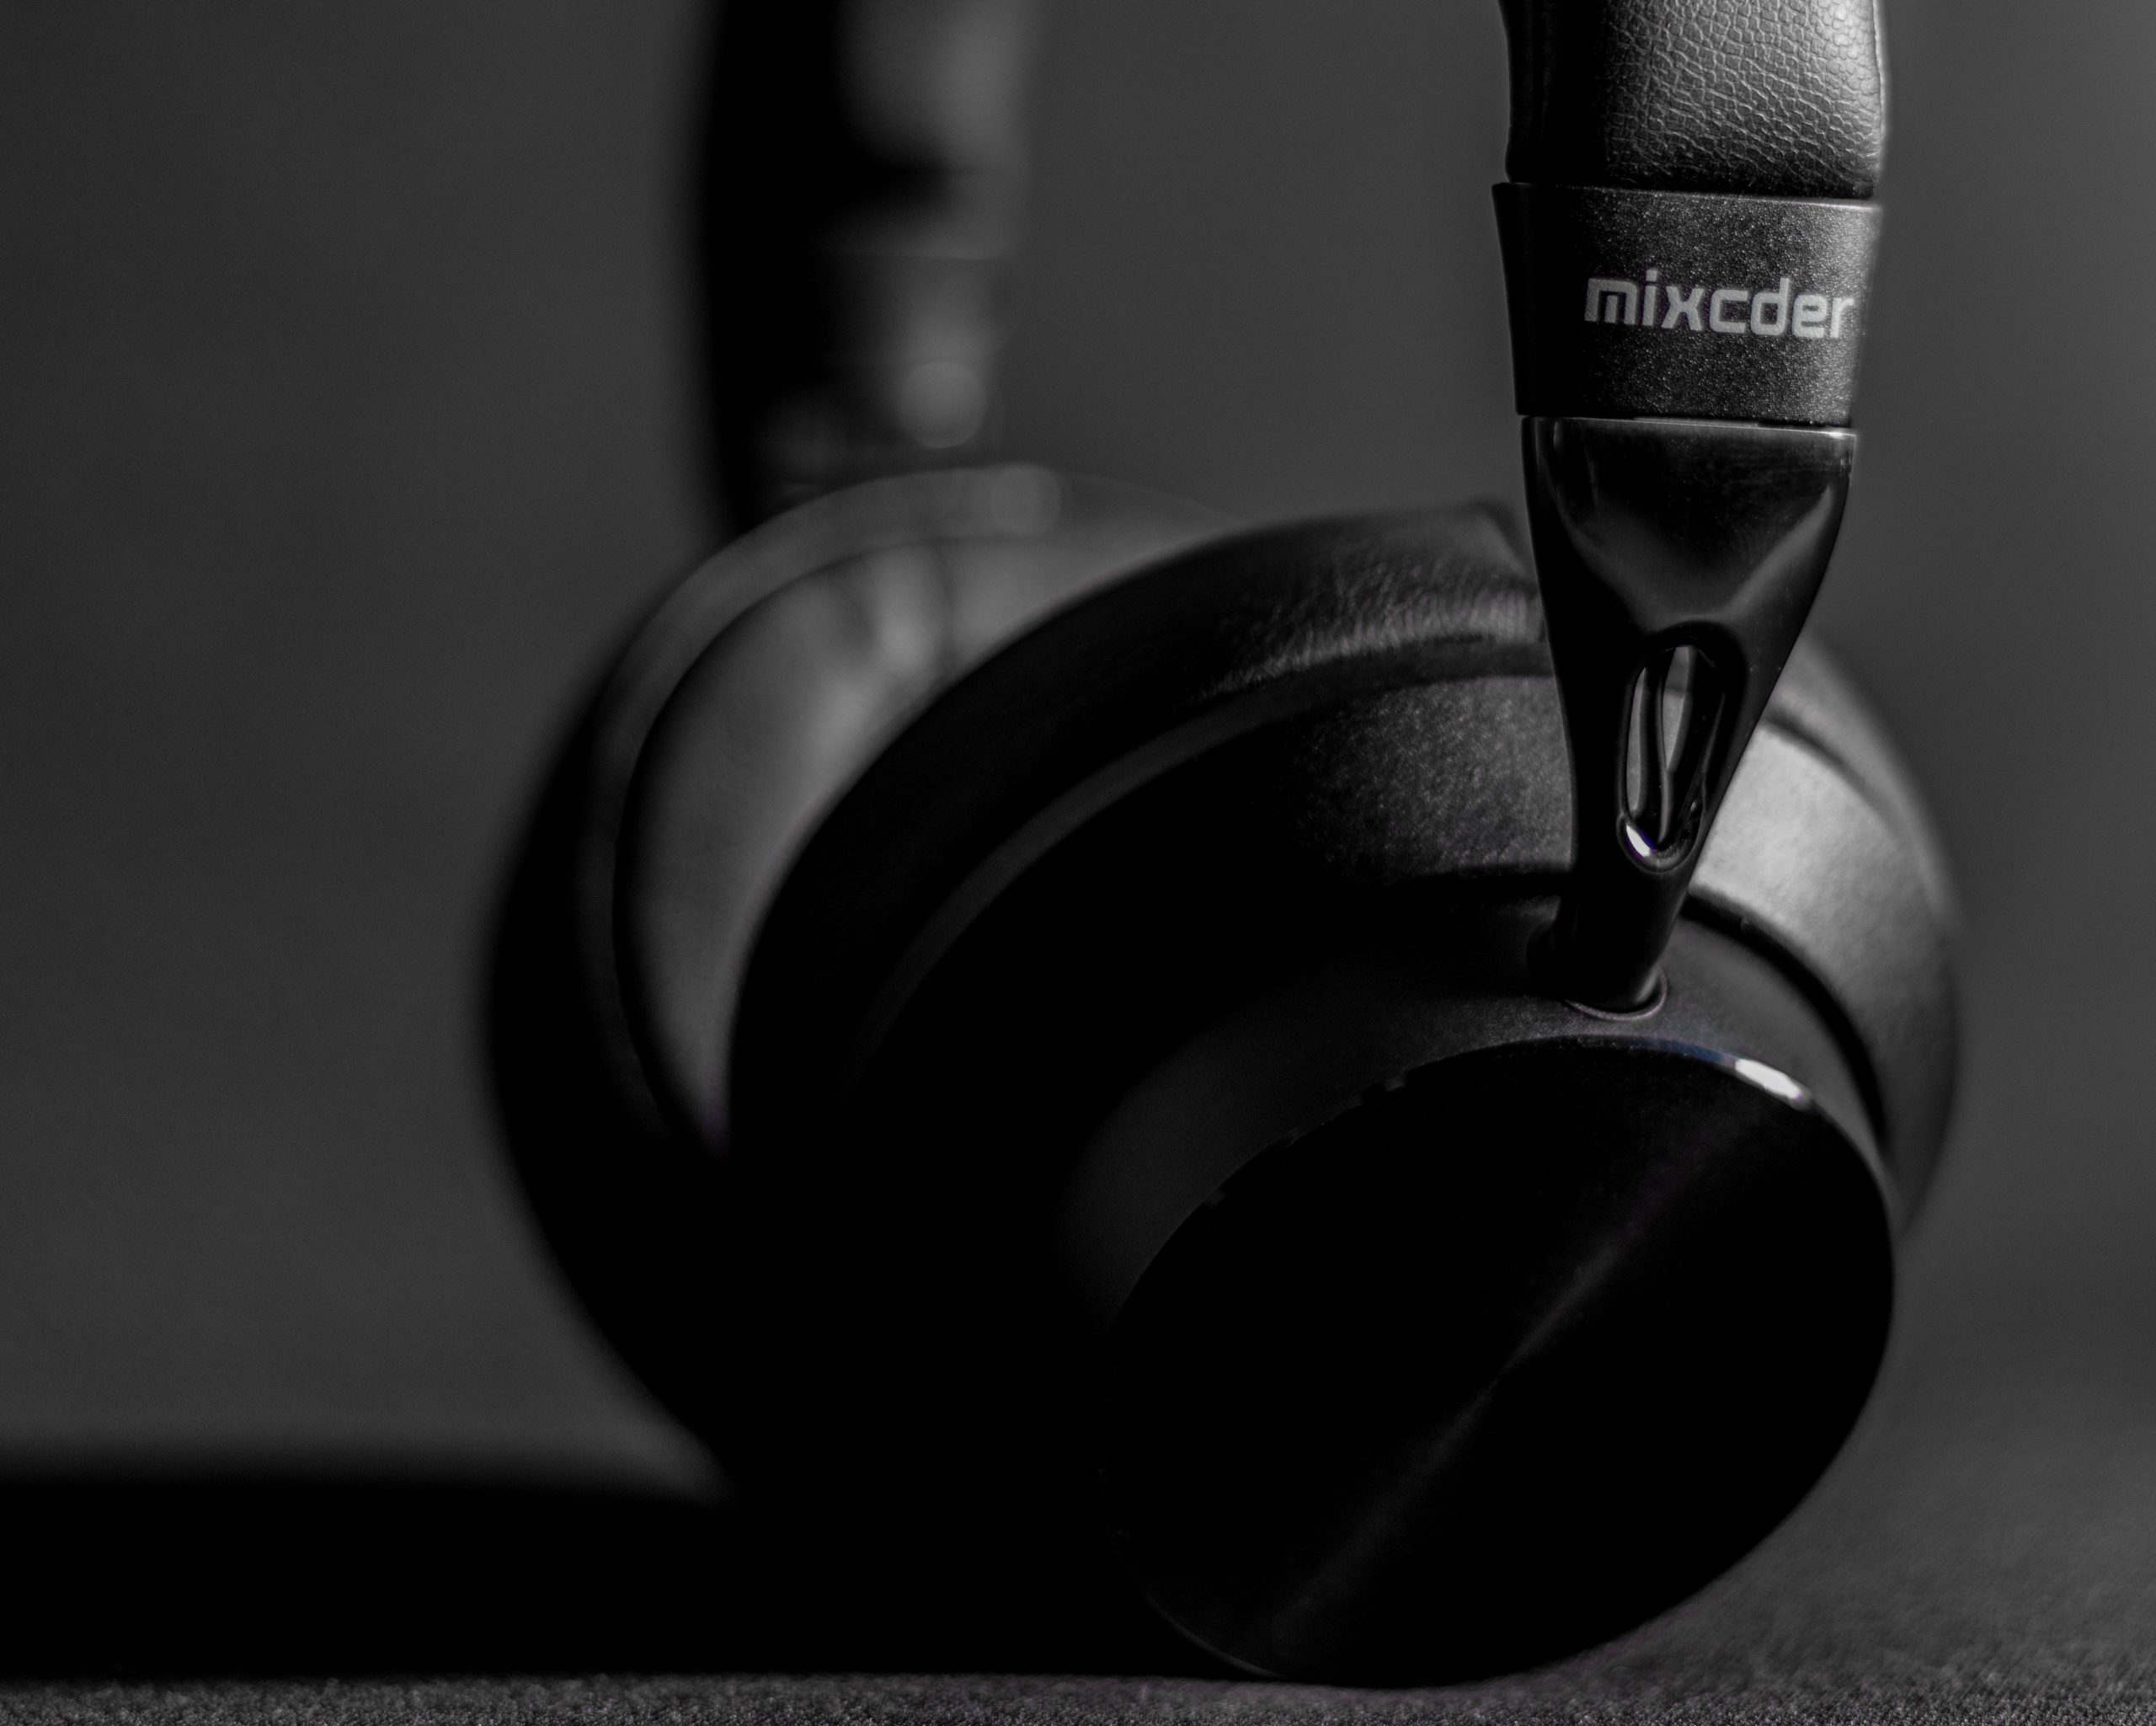 Mixcder E10 Review – Great for Price